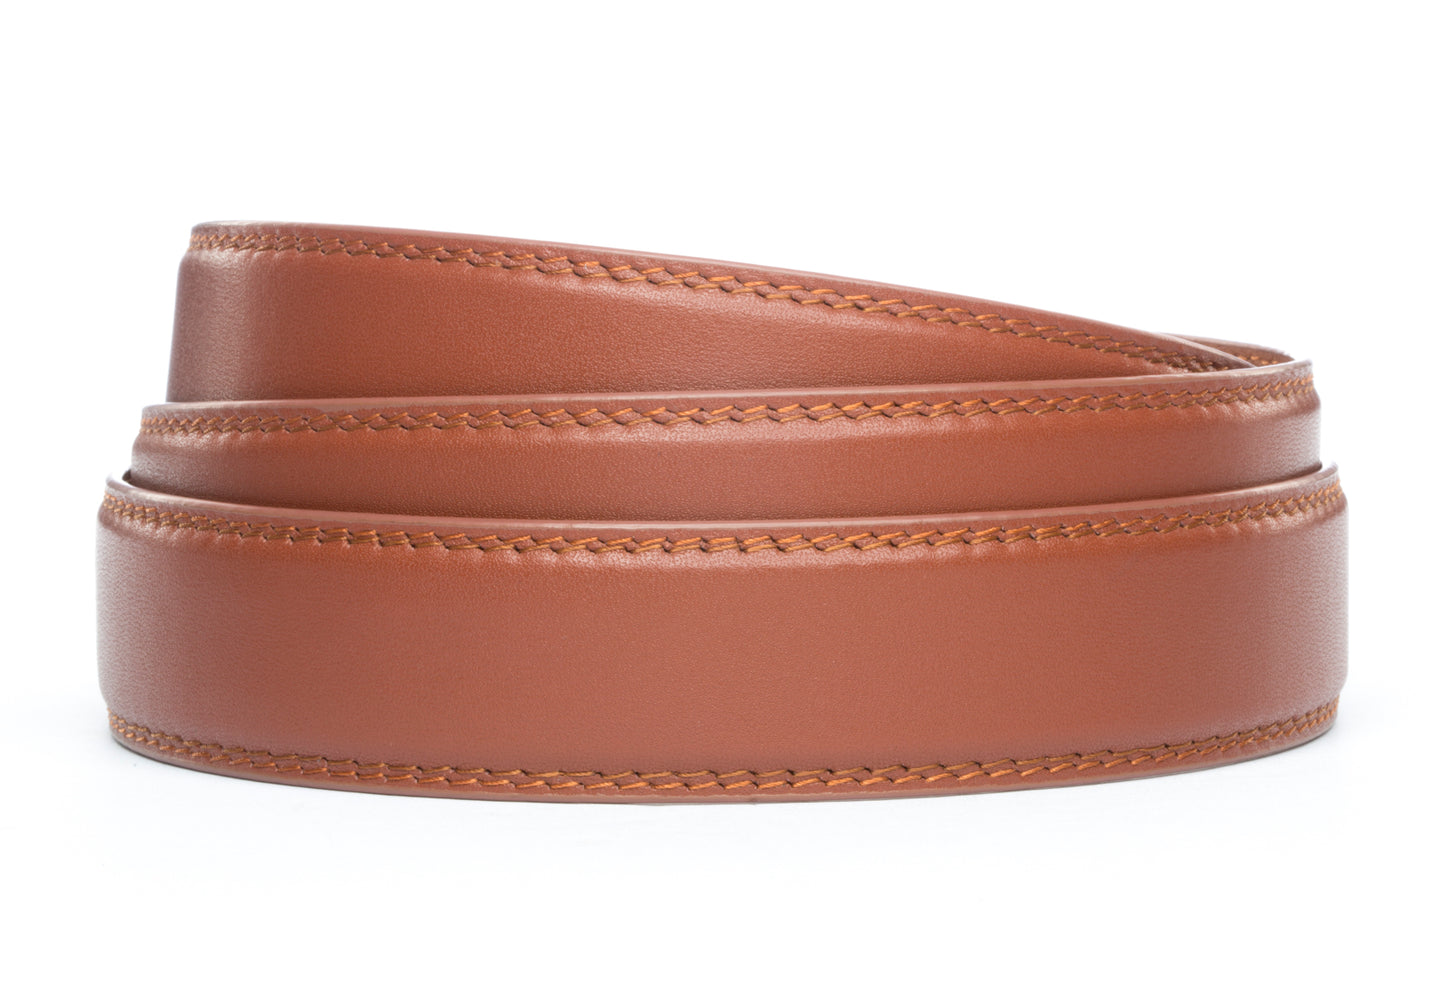 Men's leather belt strap in cognac with a 1.25-inch width, formal look